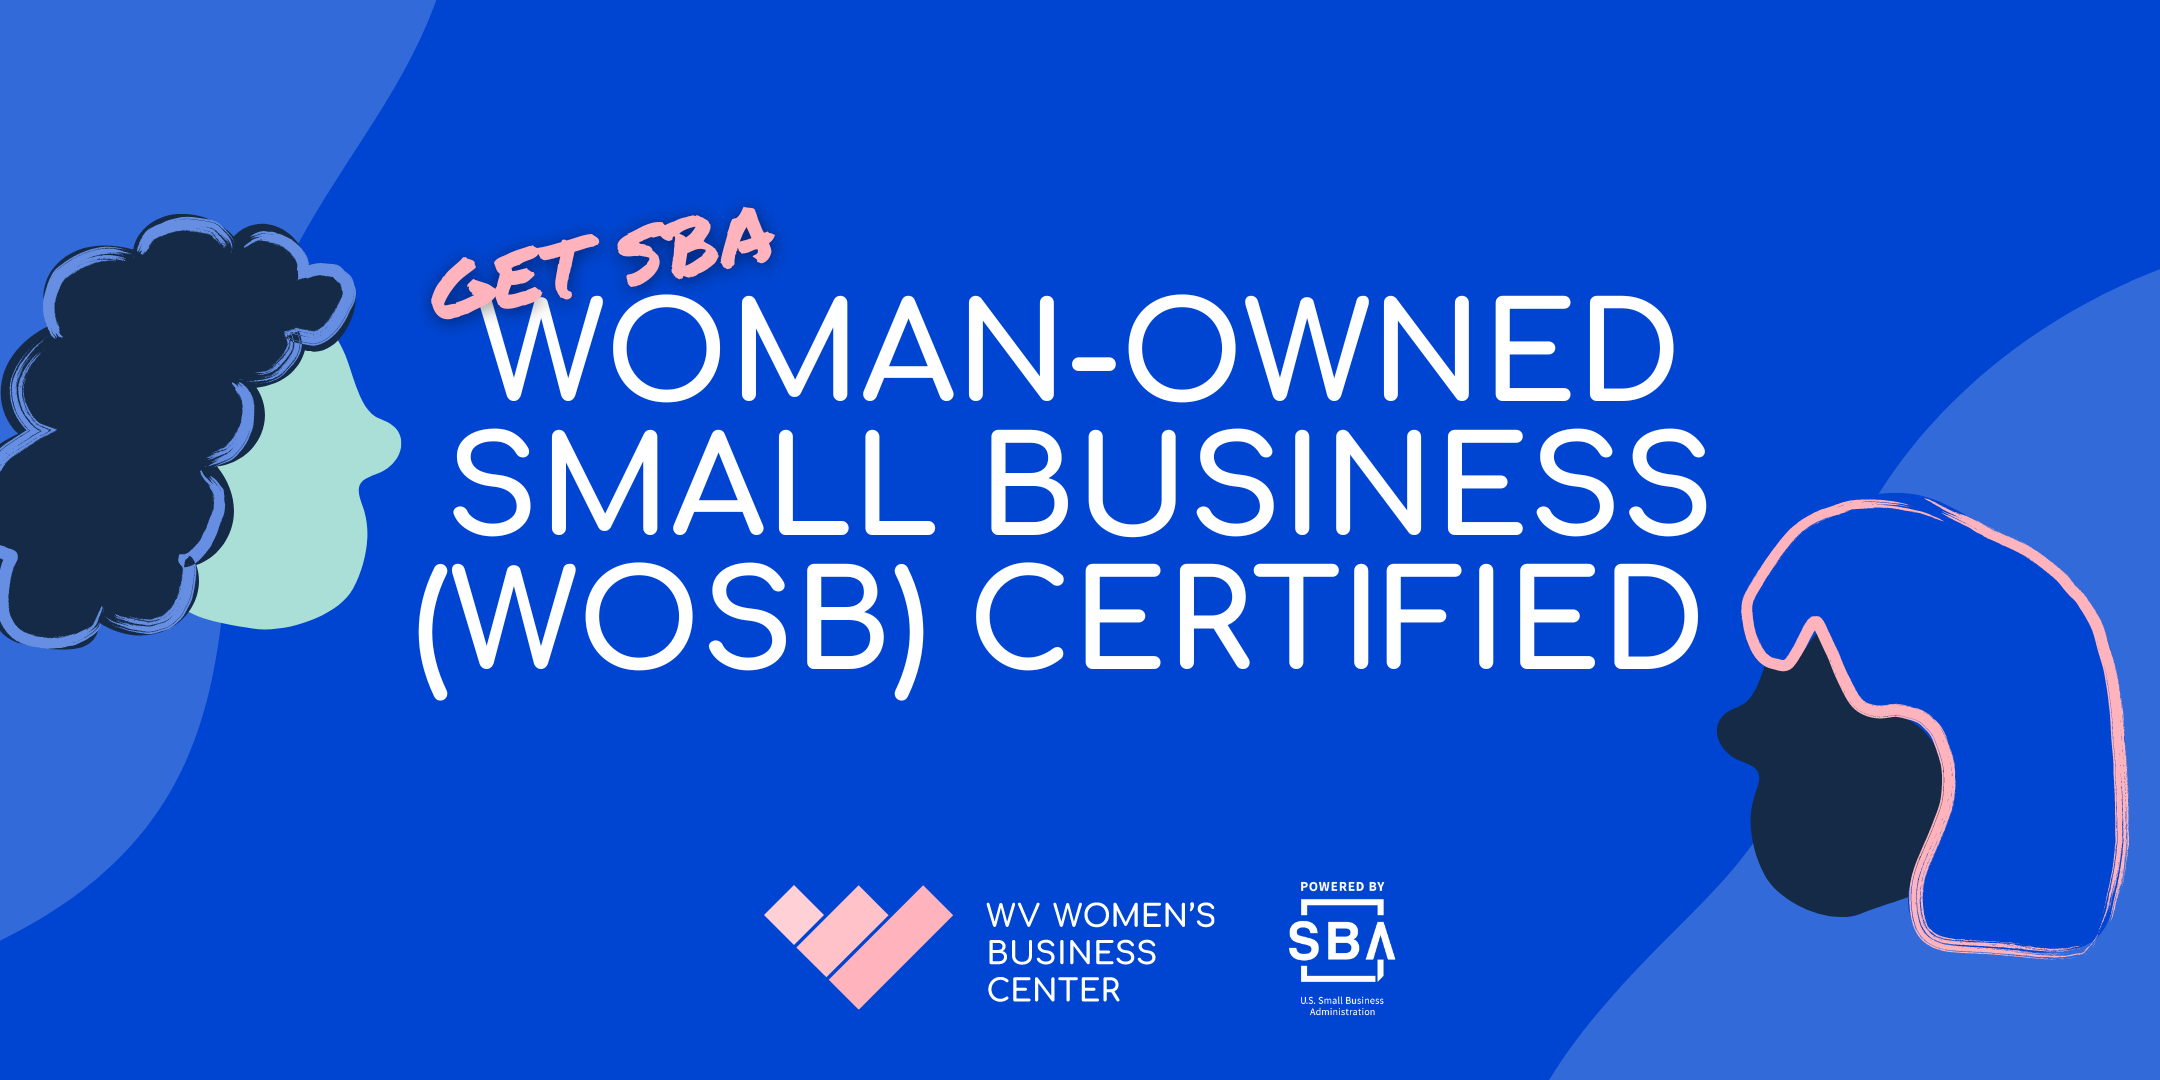 Getting Sba Woman Owned Small Business Wosb Certified West Virginia